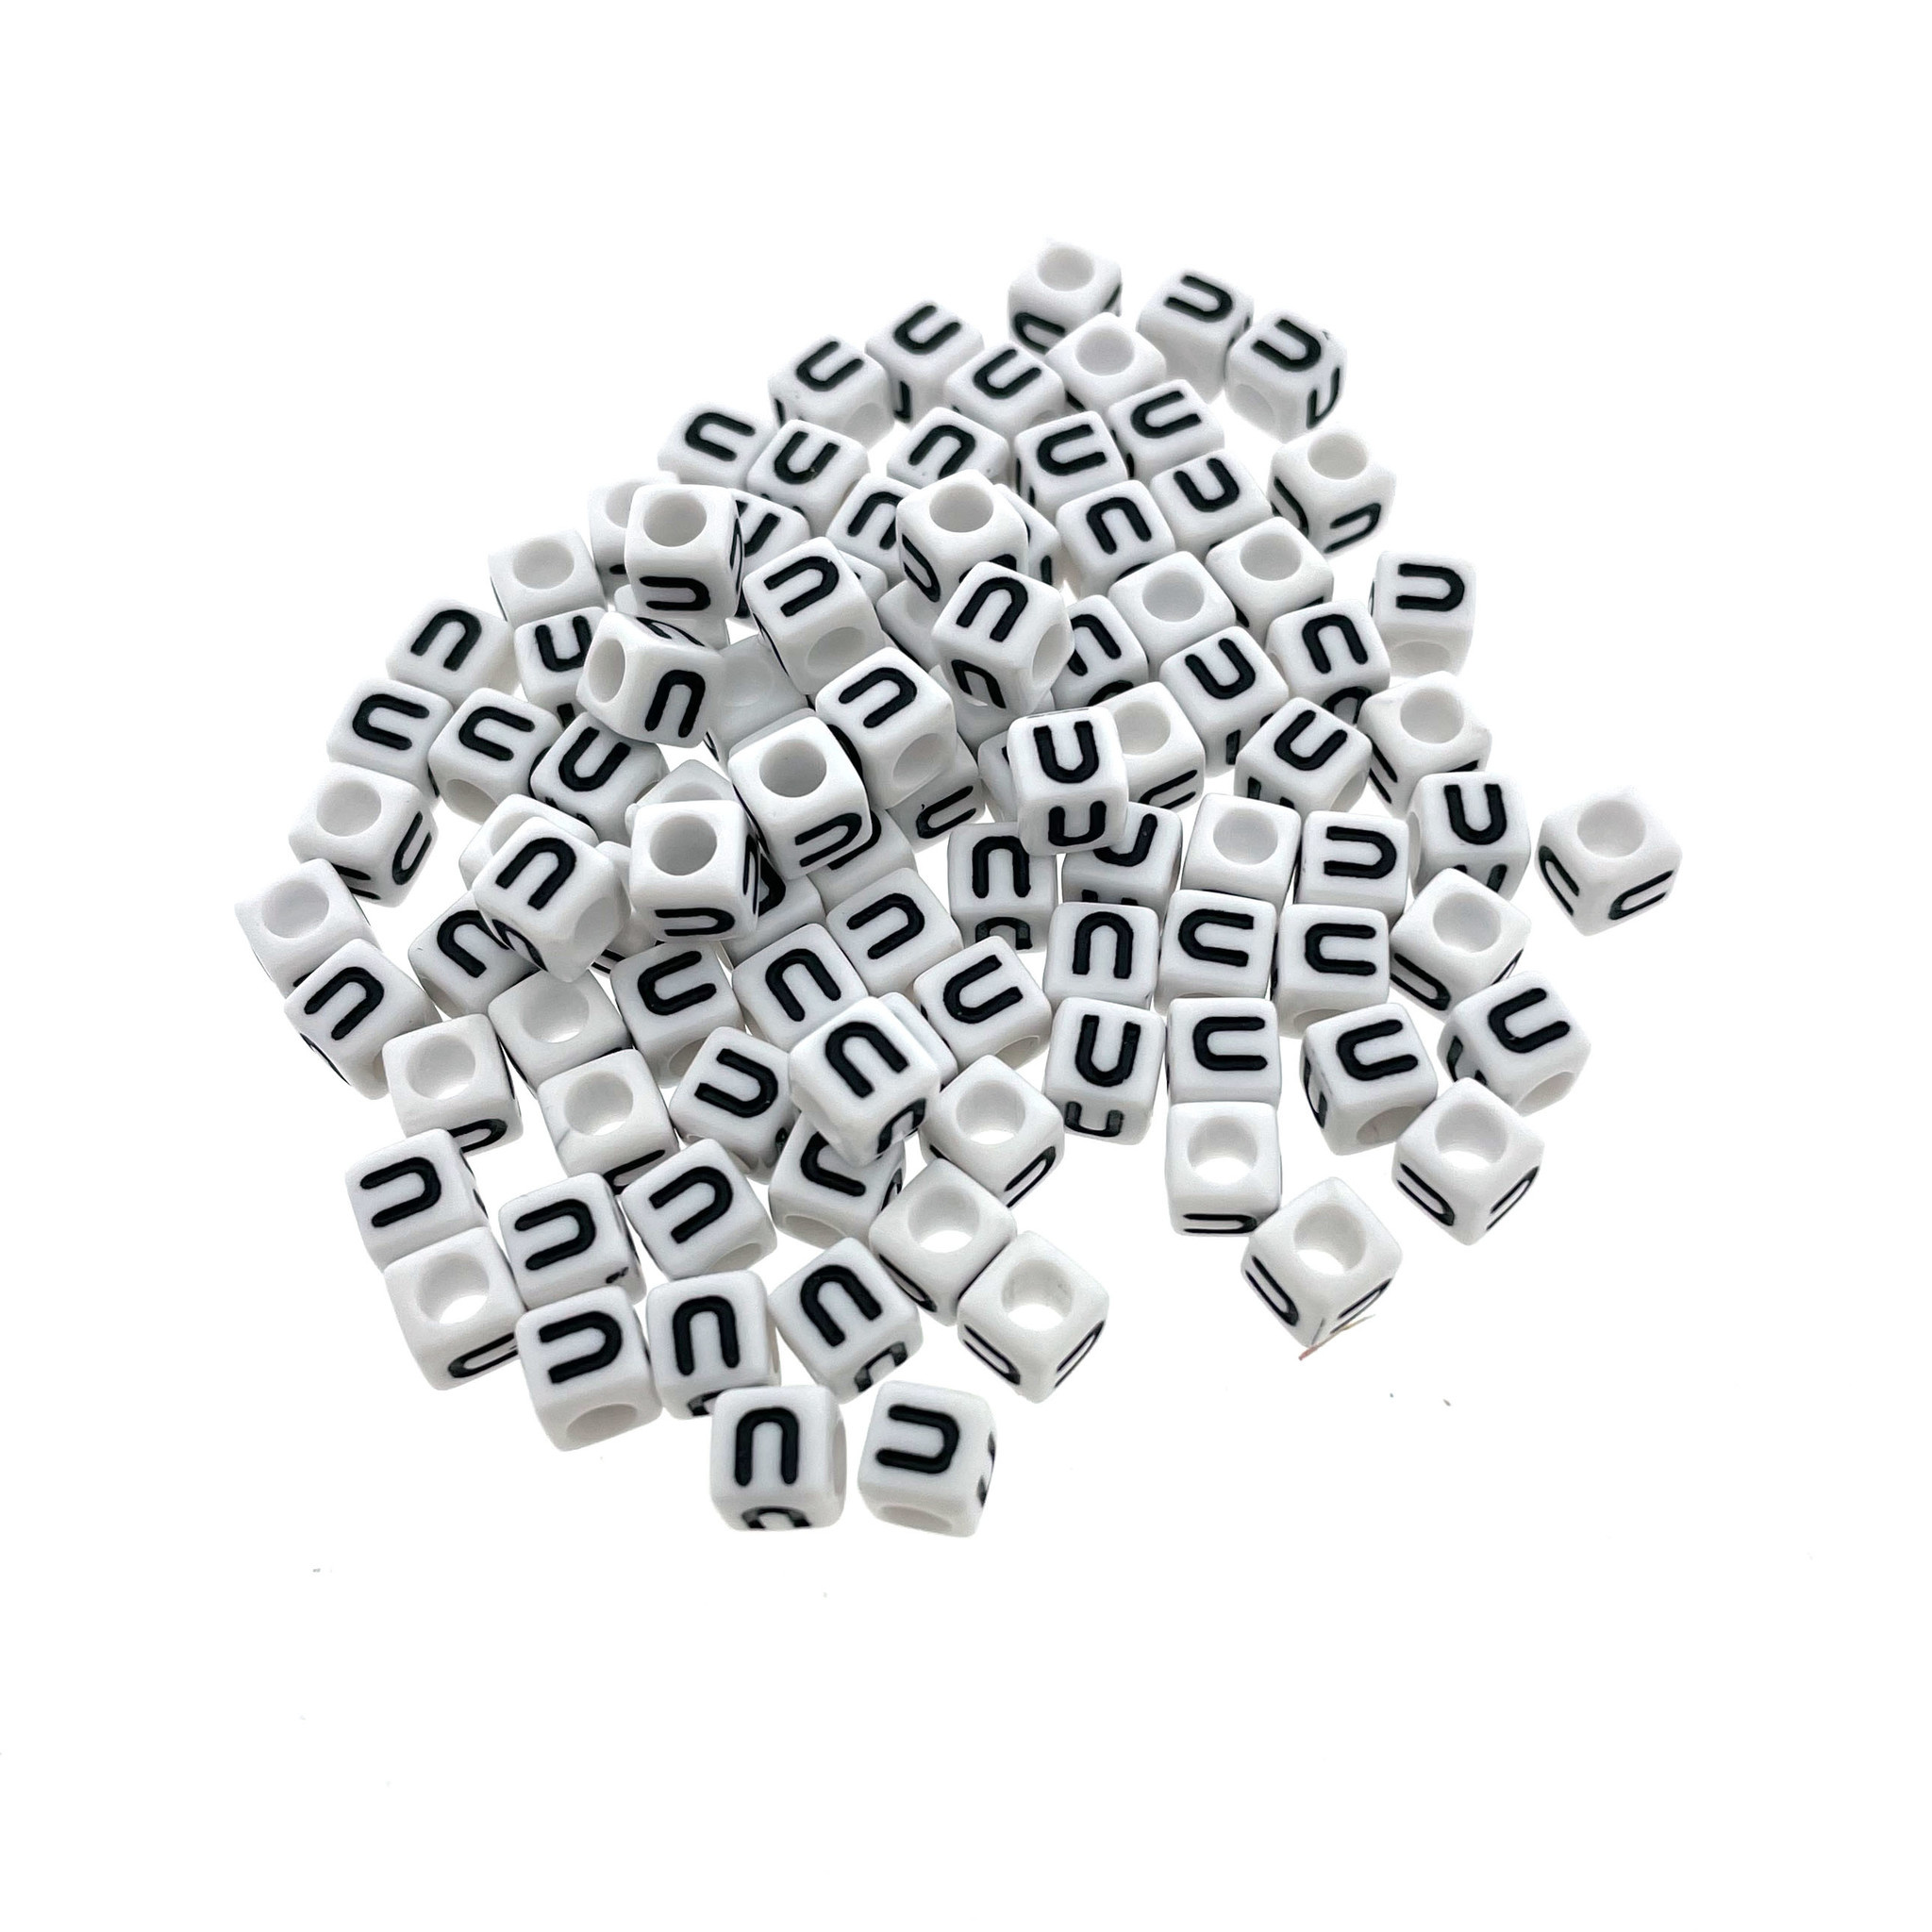 Buy Paracord alphabet letter beads White J at 123Paracord - 123Paracord